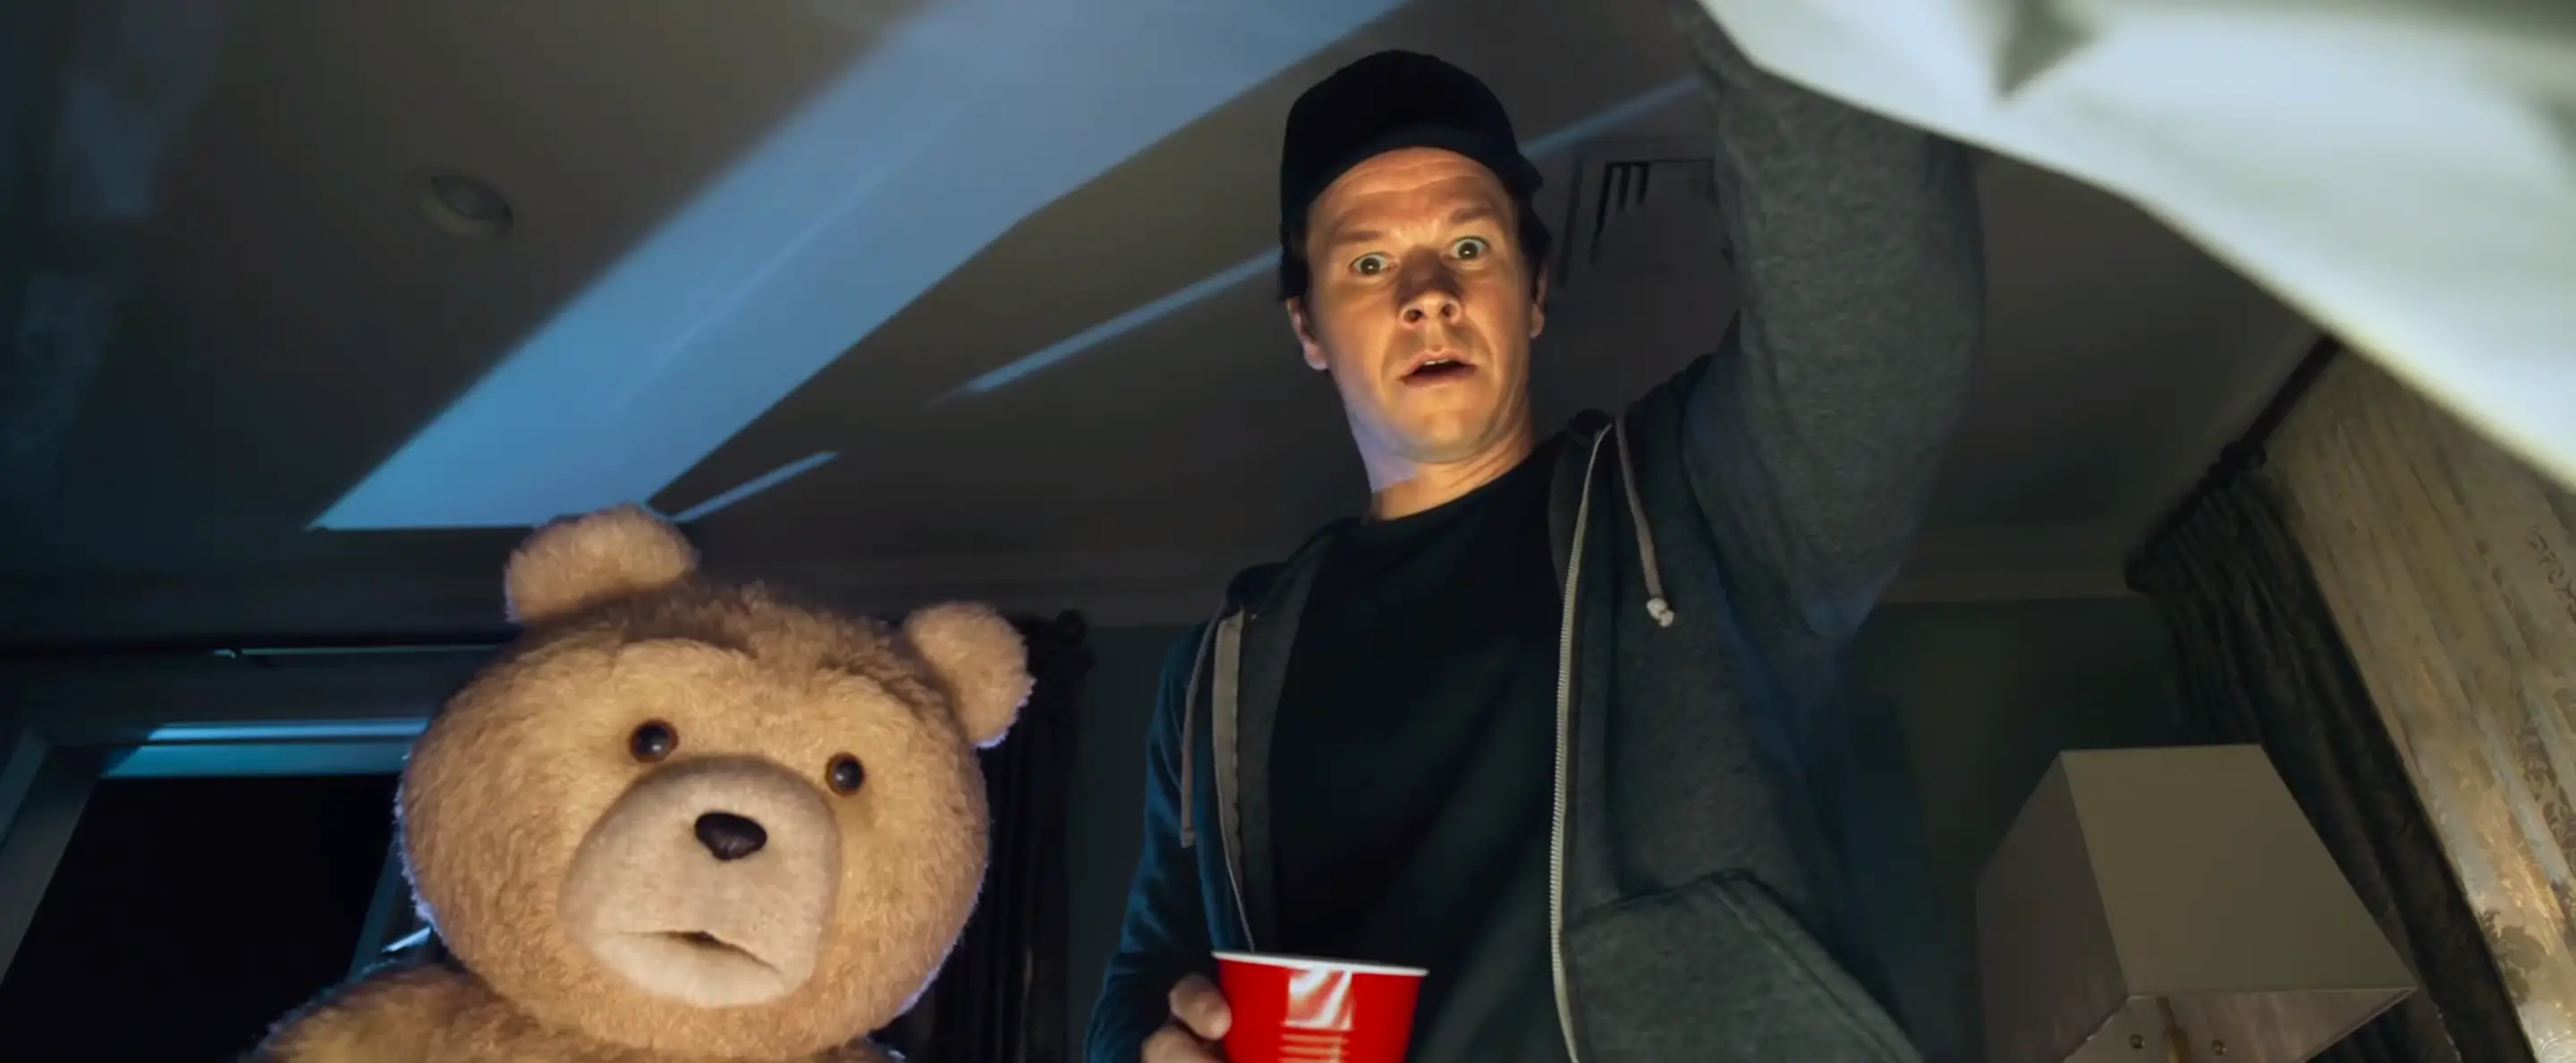 Ted 2 - Movie HD Wallpapers